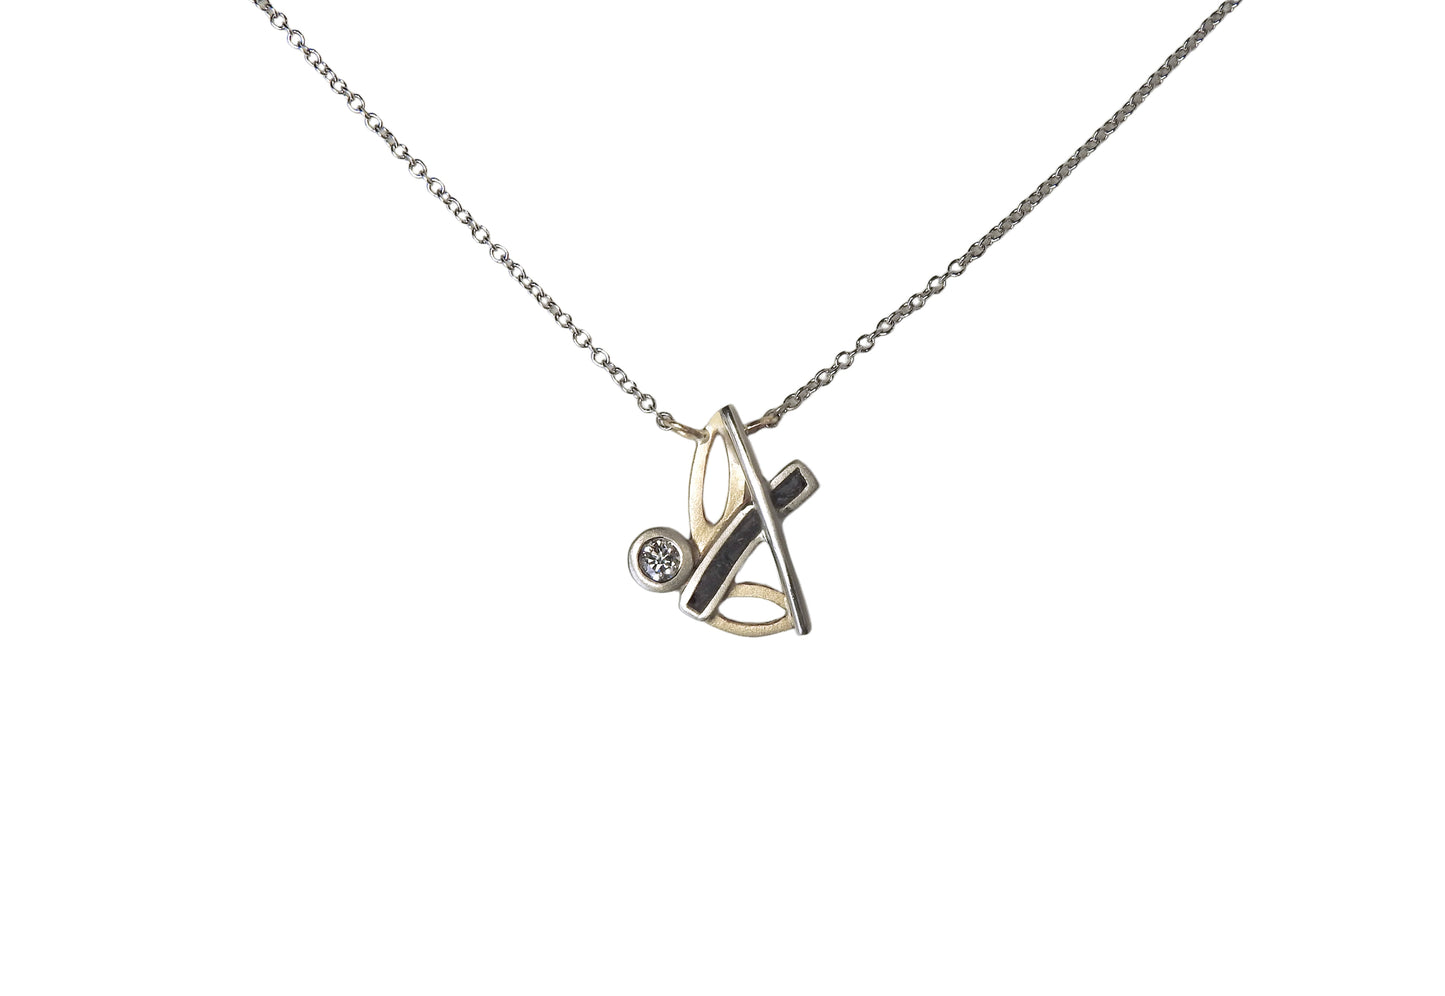 Bespoke 14kt white and yellow gold necklace with limestone inlay and .10 CT CANADAMARK - Hearts & Arrows diamond F+ VS, small 14kt yellow gold heart and arrow tag near clasp. 